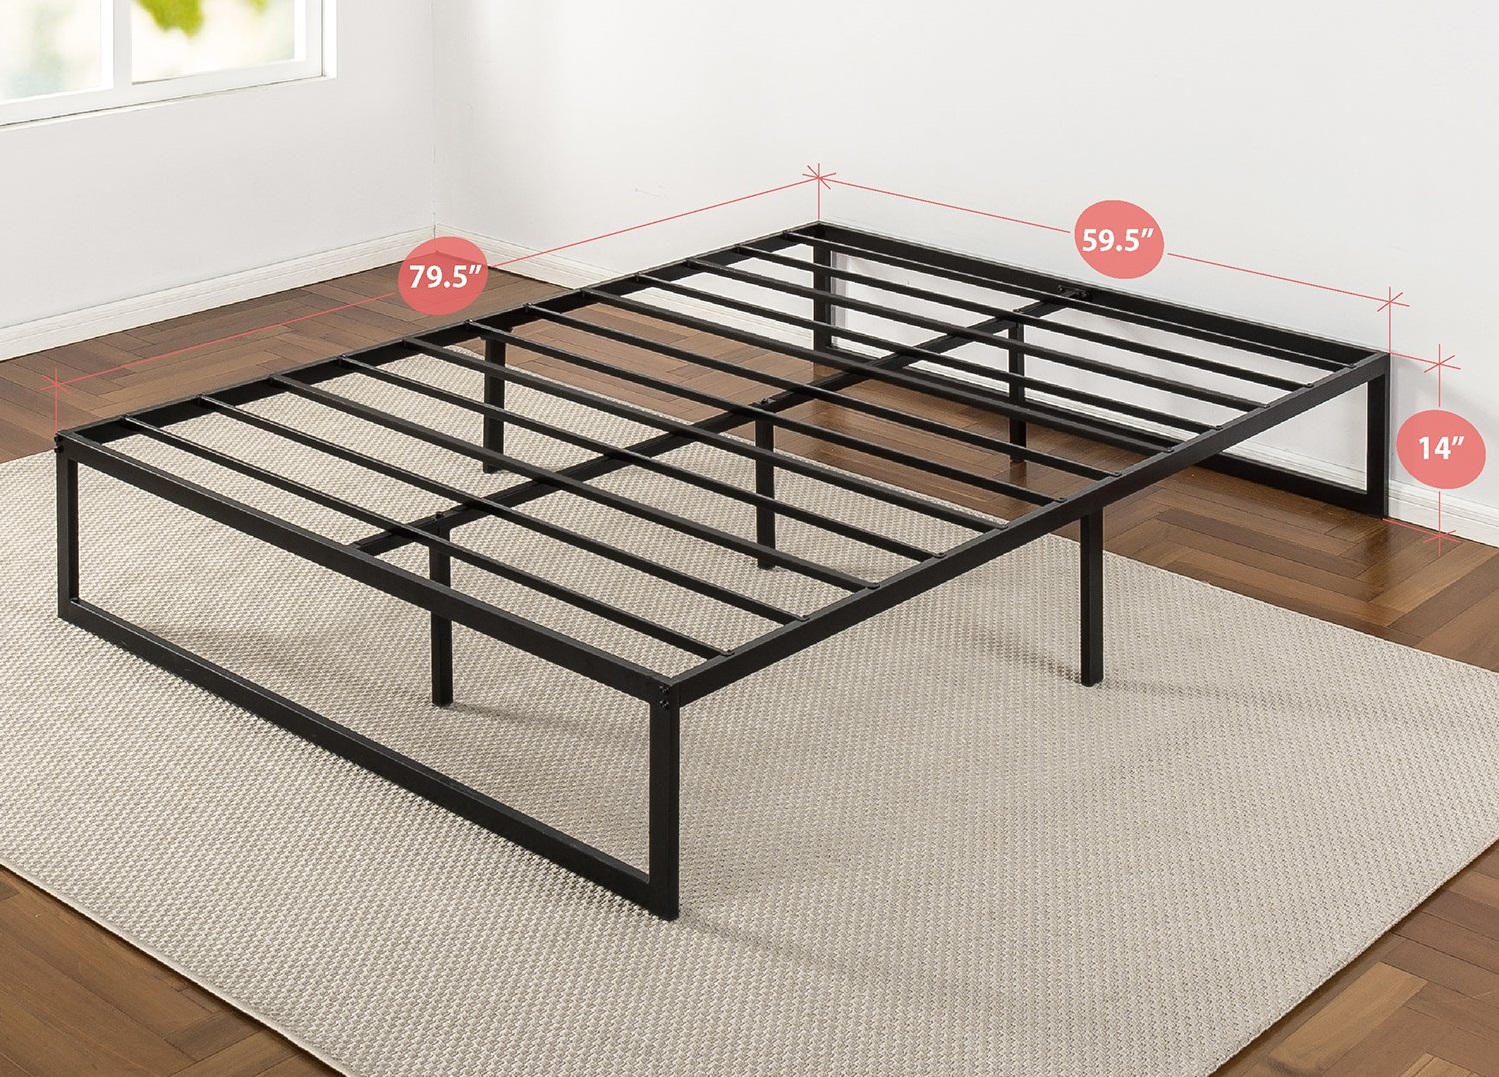 the dimensions of a platform bed